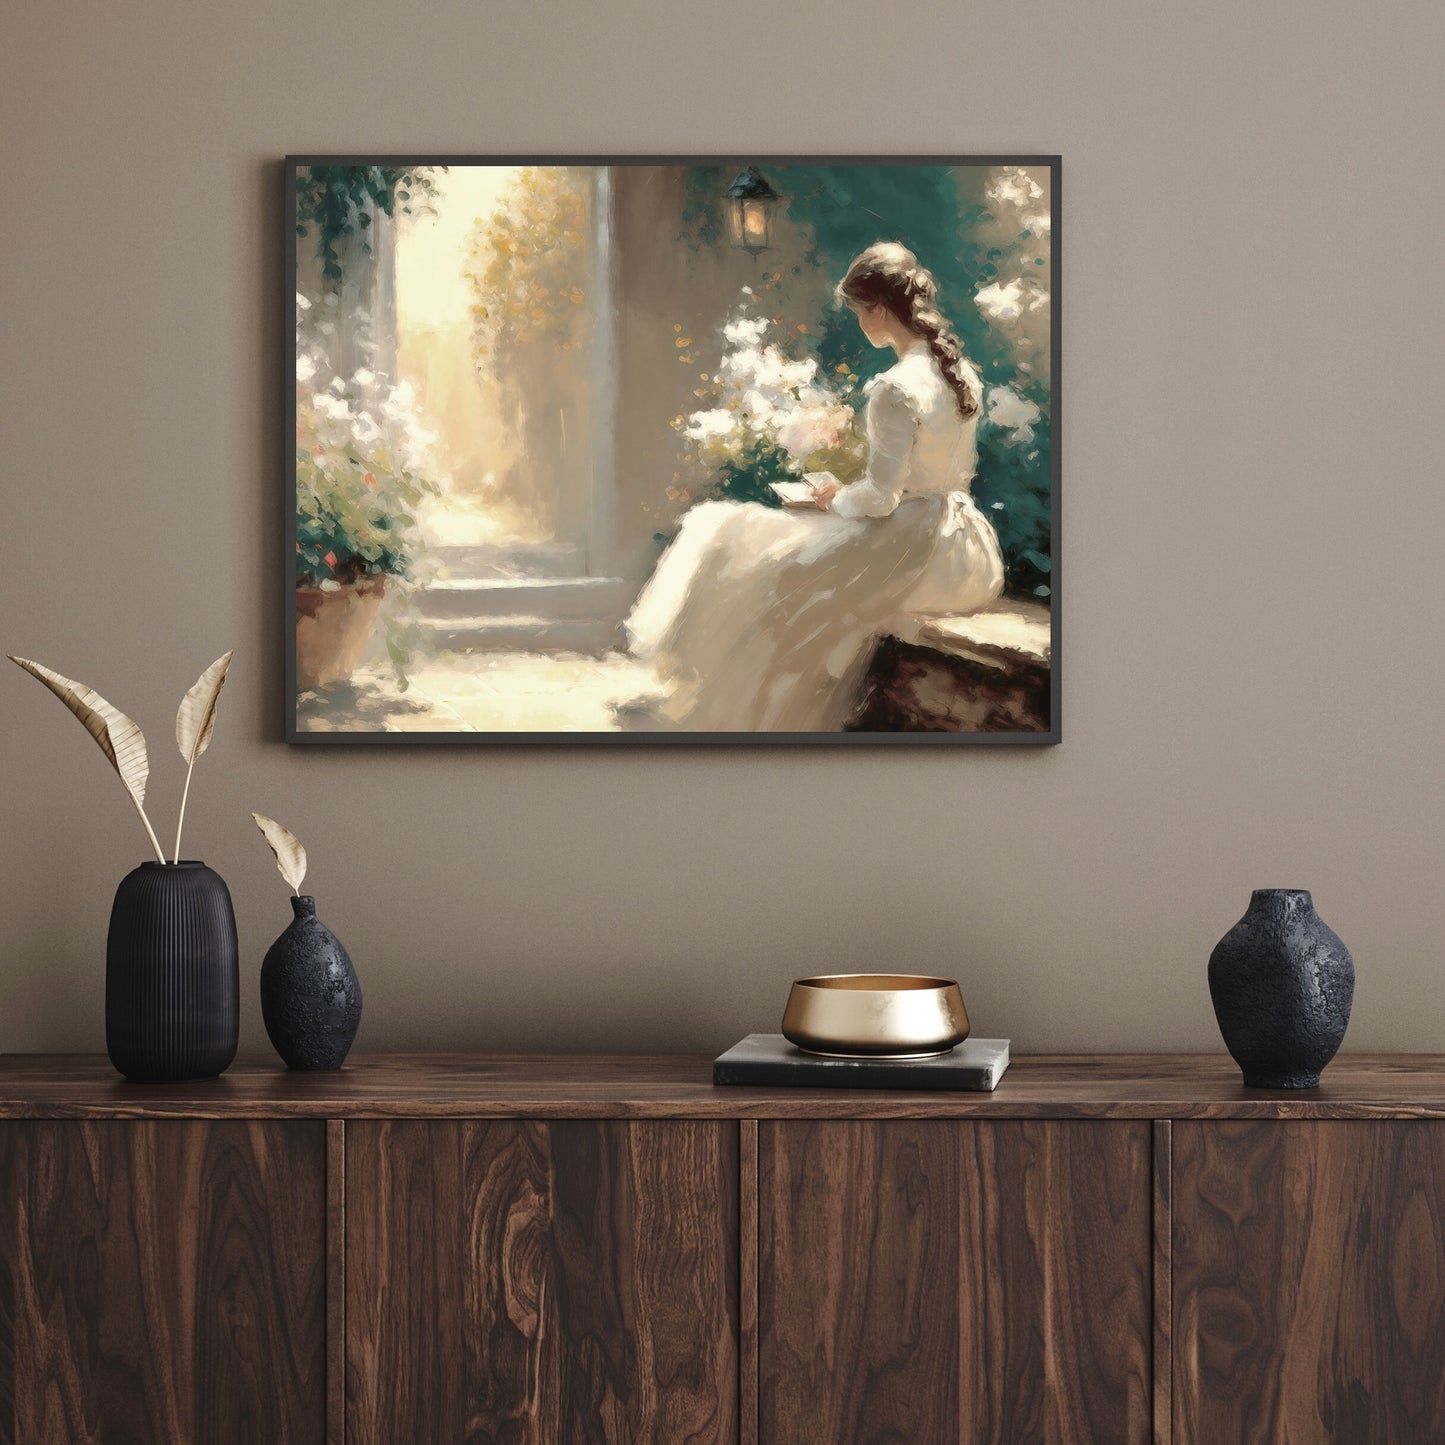 Woman Reading Paper Poster Prints Vintage Oil Painting of Woman in White Dress Amid Flowers Wall Art for Home Decor